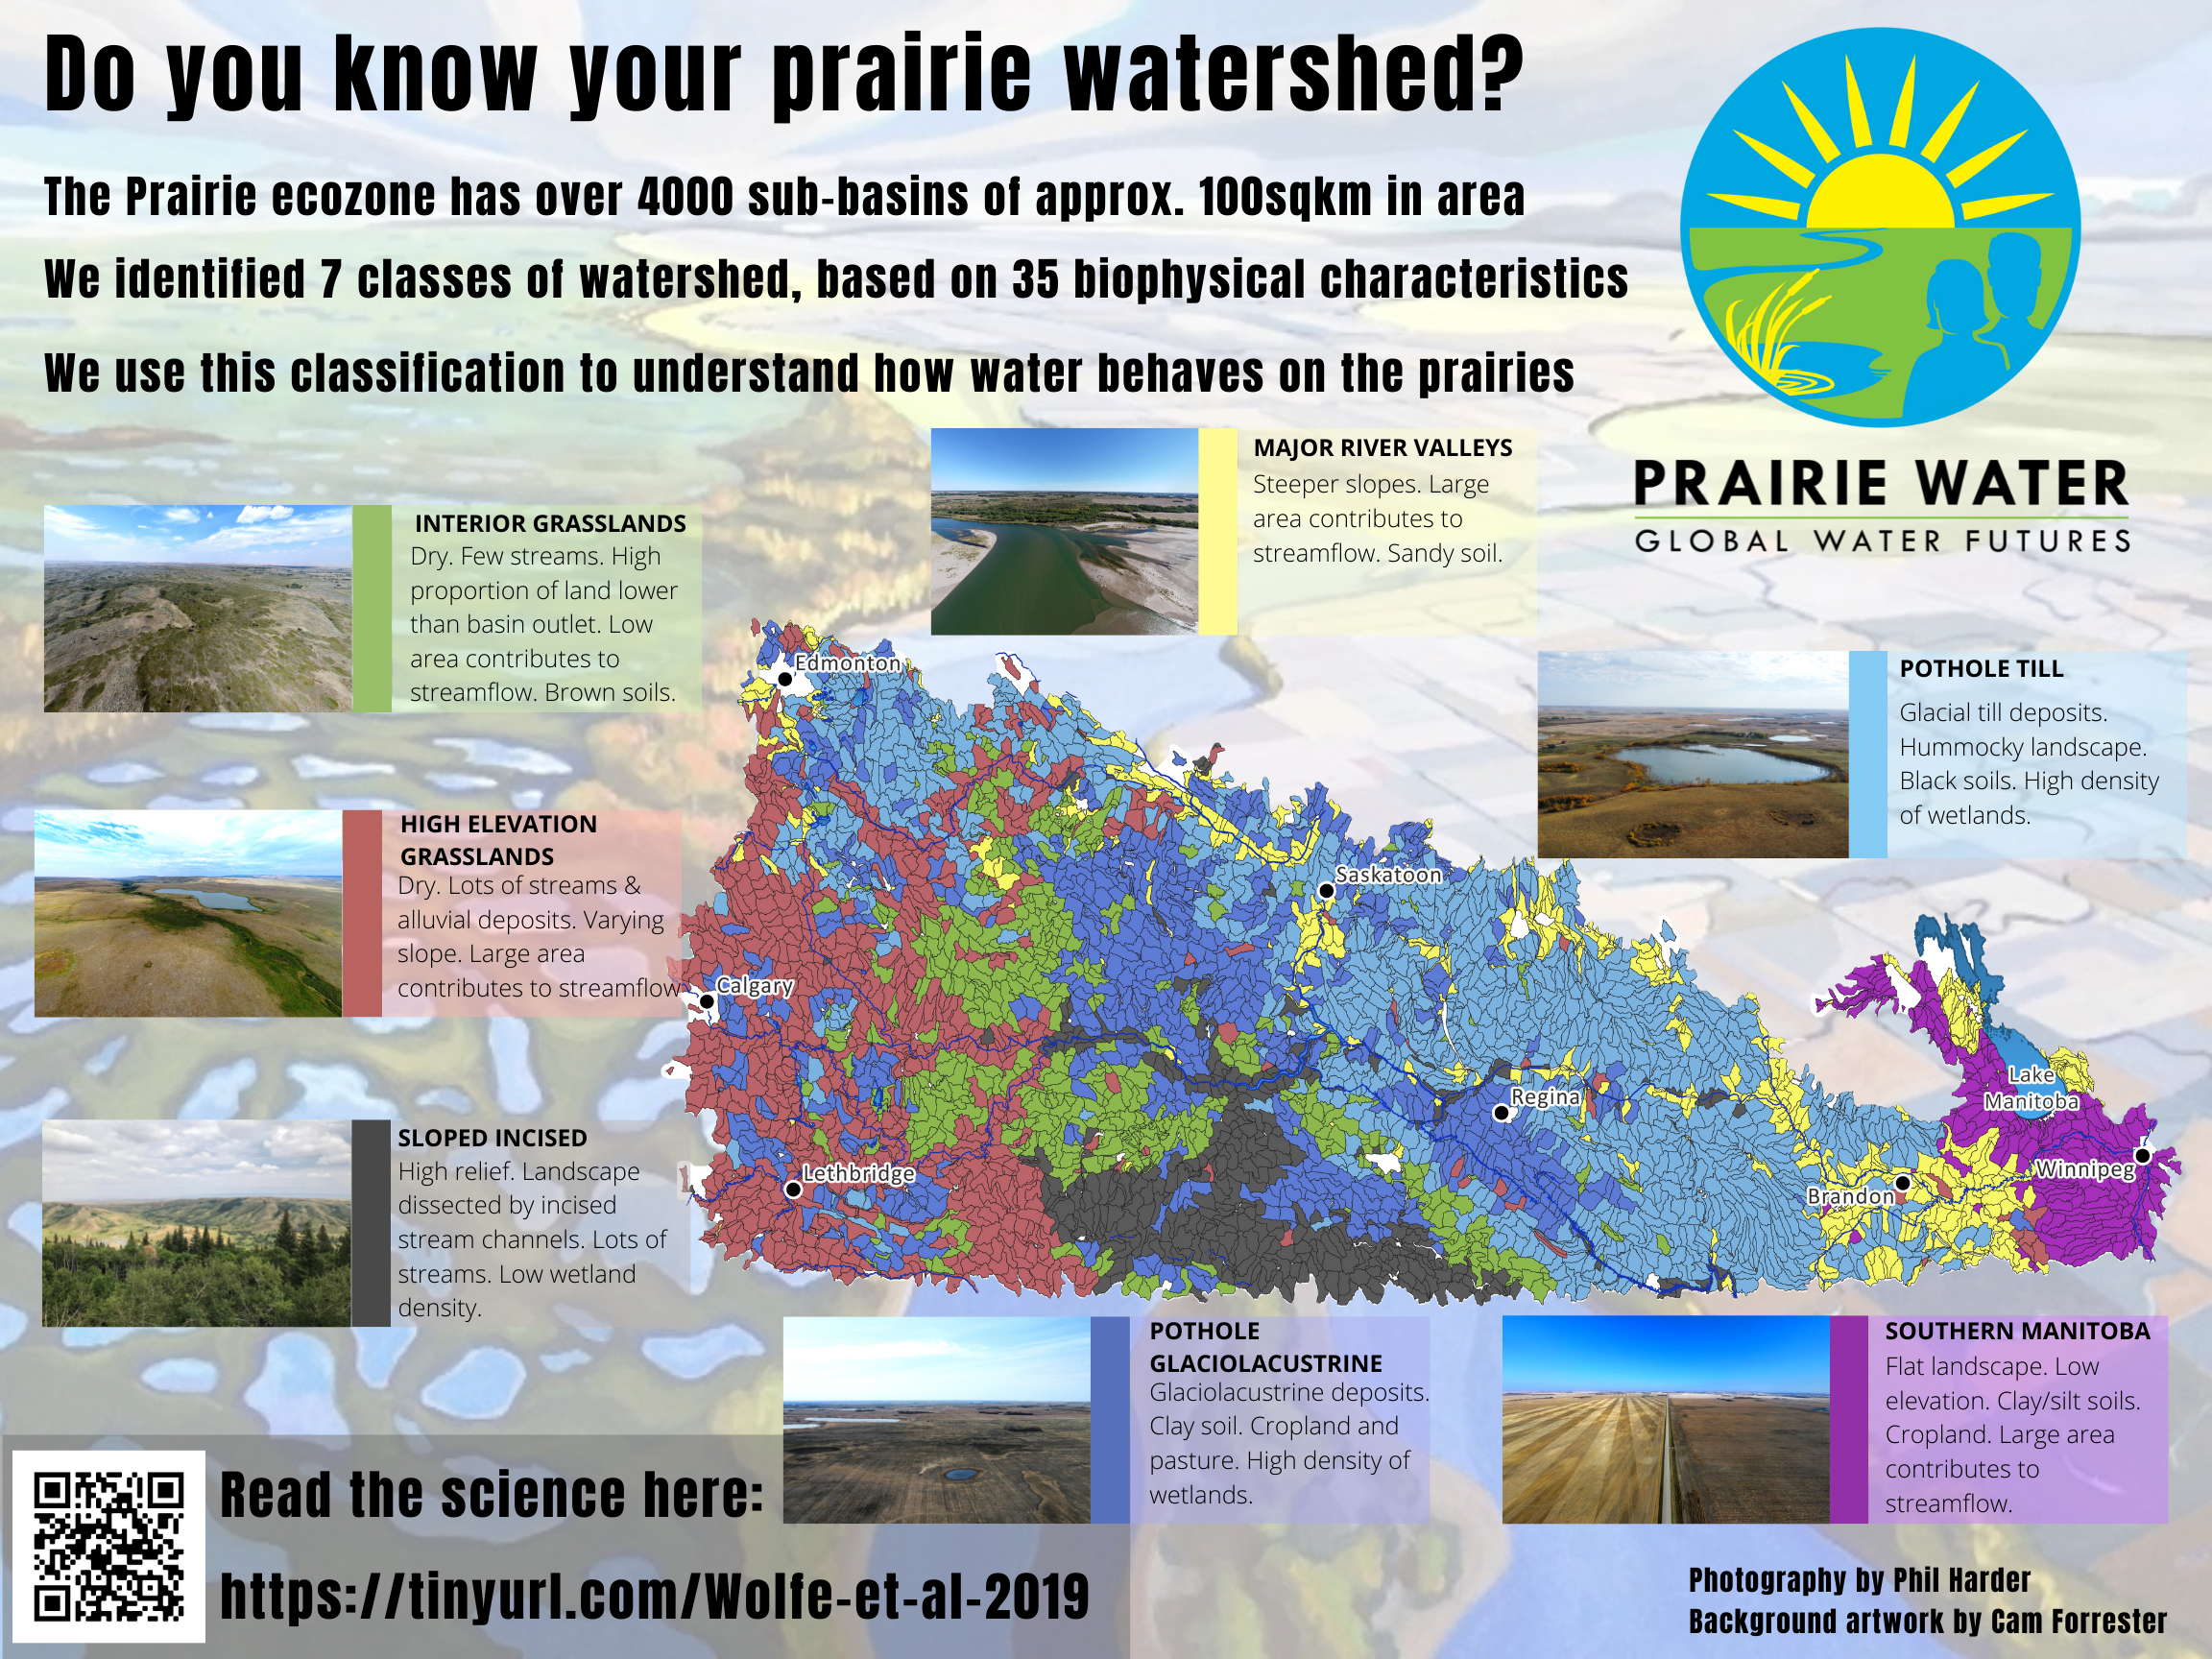 Infographic describing the characteristics of the 7 classes of watershed identified in the Prairie ecozone.